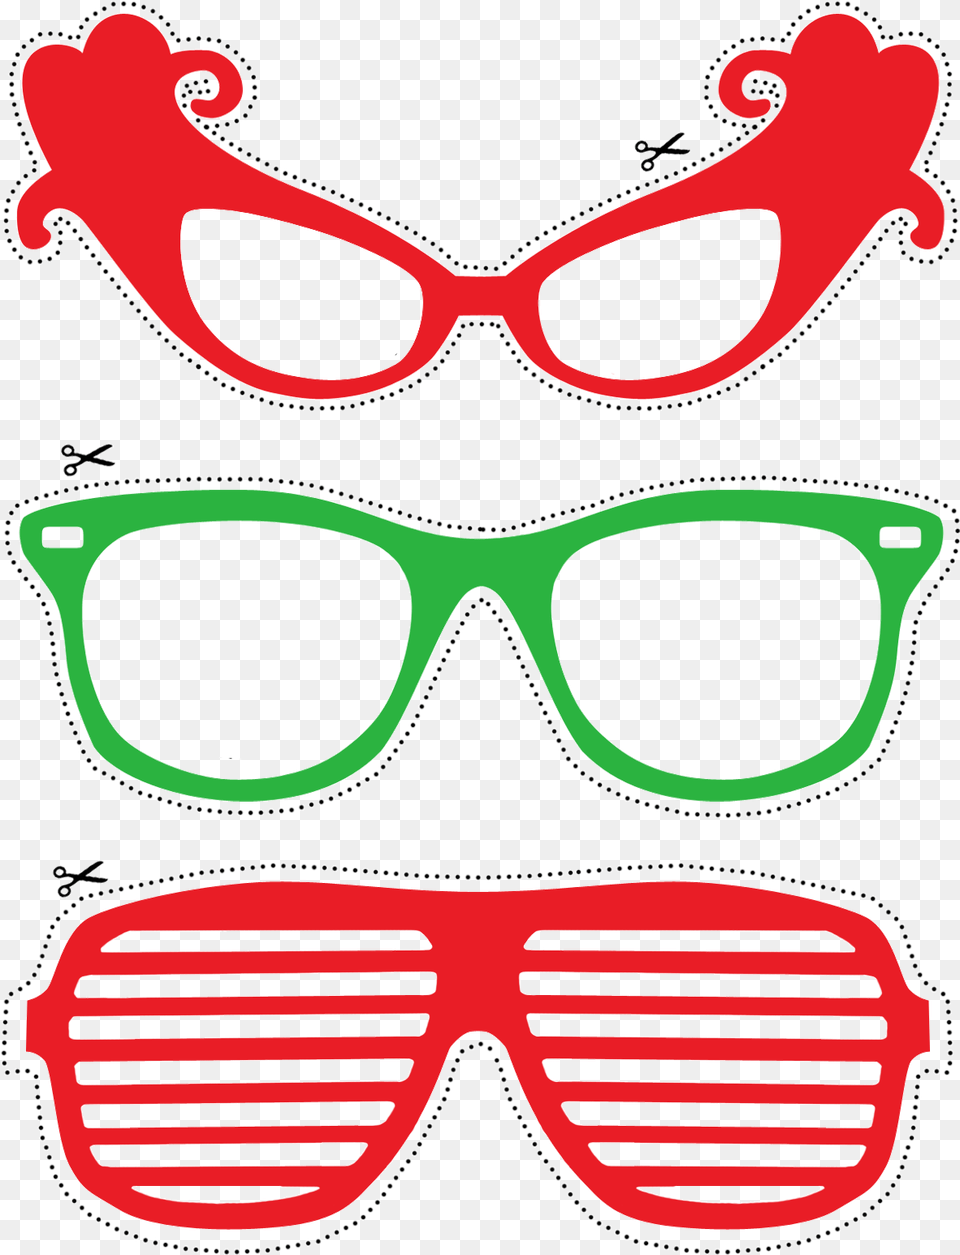 Photo Booth Props Red And Green Glasses Free Printable Shutter Shades, Accessories, Sunglasses, Smoke Pipe Png Image